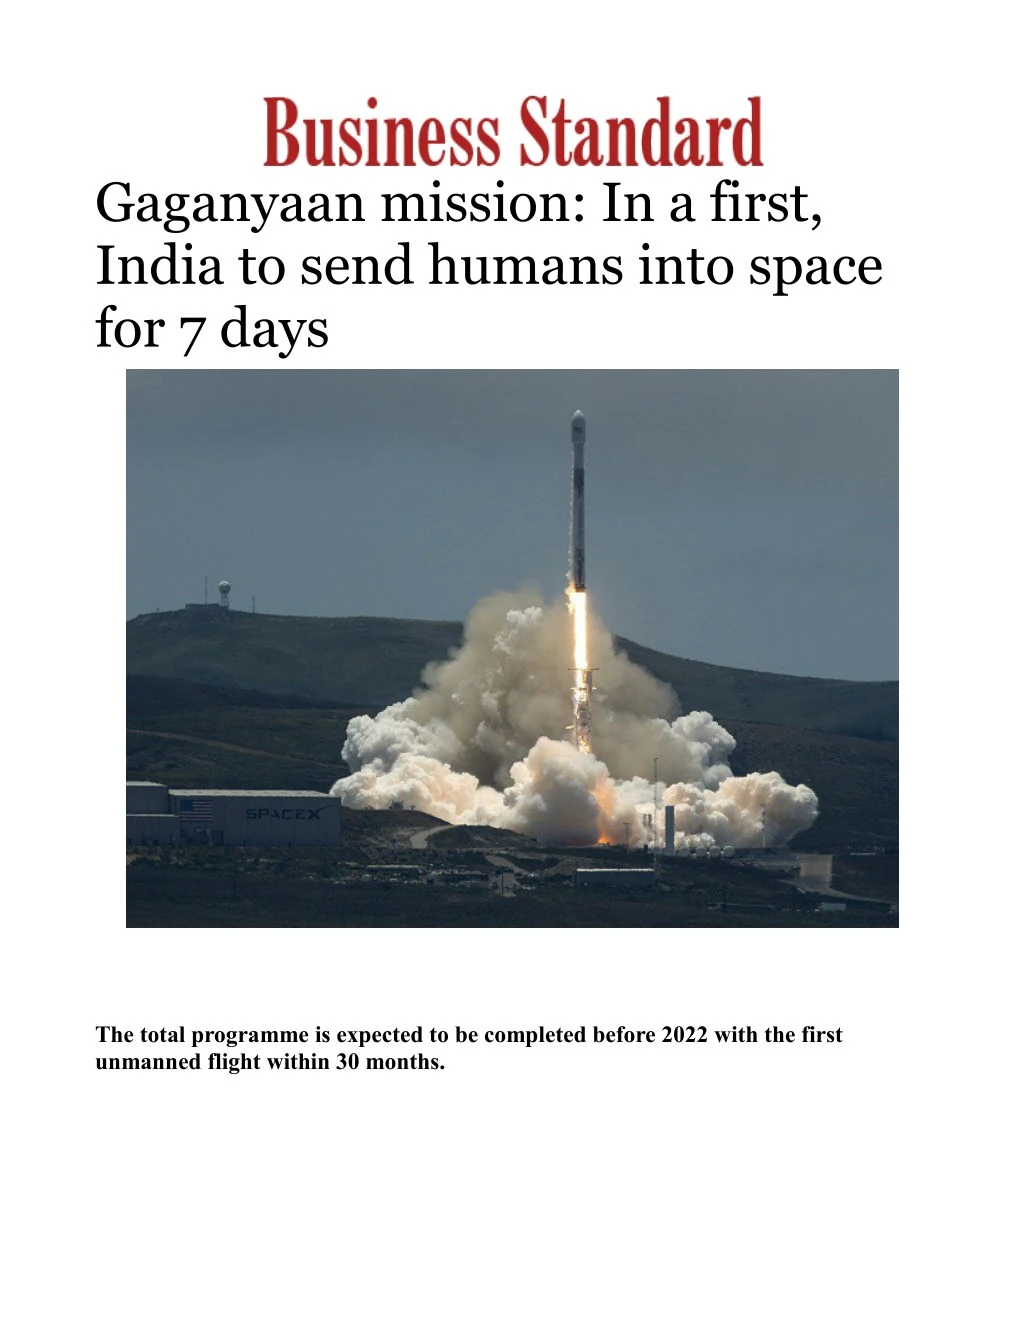 gaganyaan mission in a first india to send humans